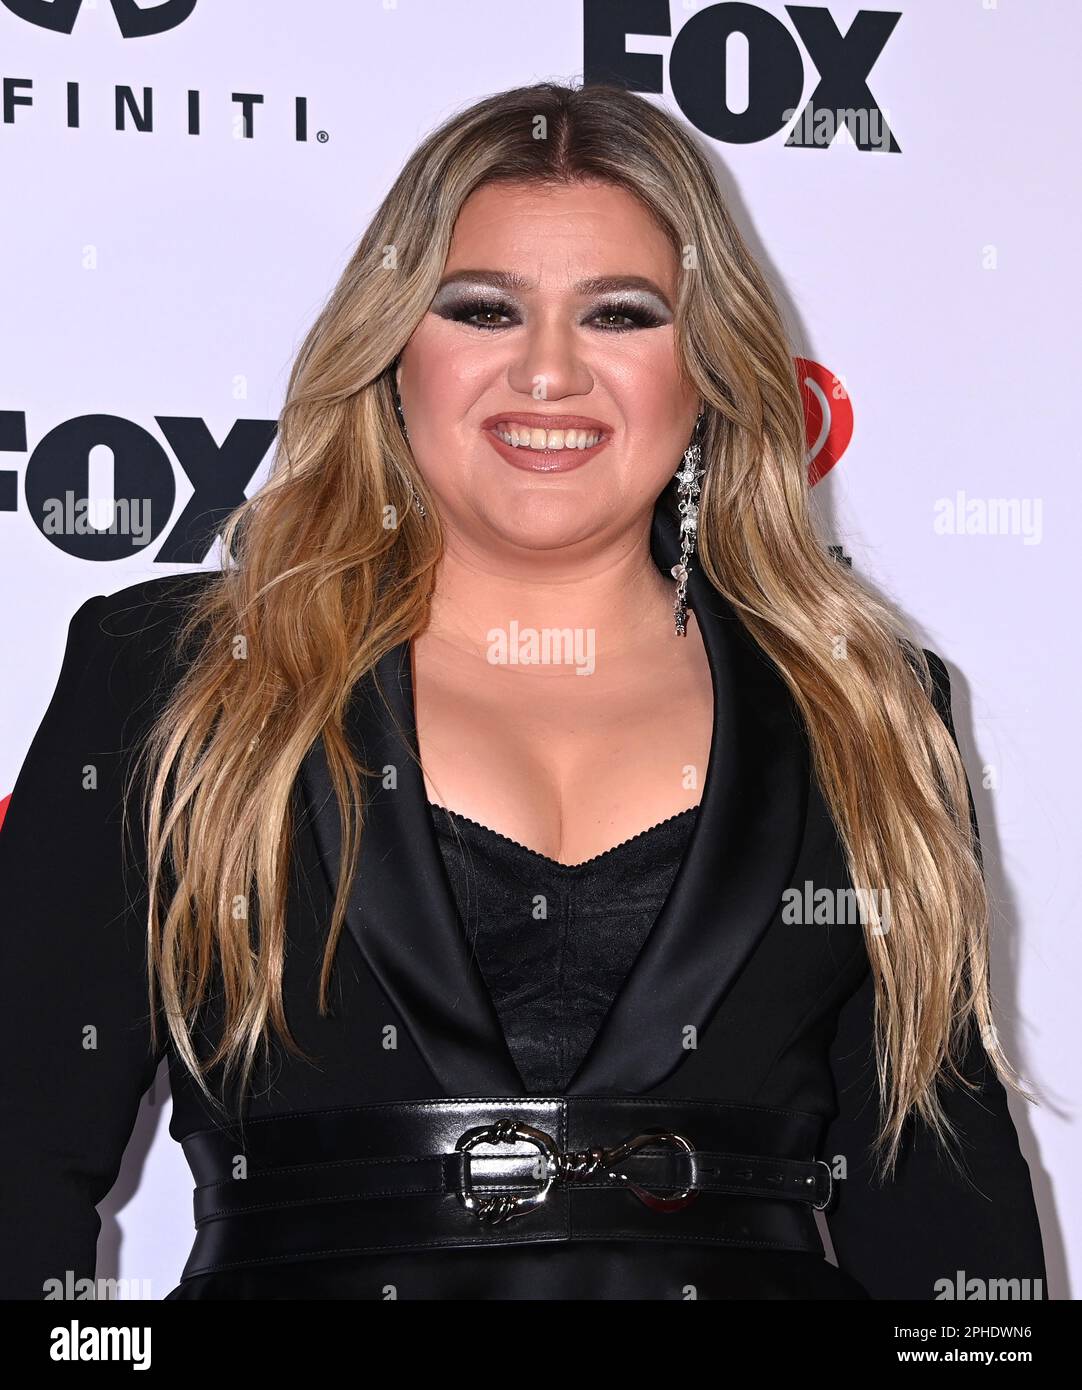 Pink, Kelly Clarkson to Perform at the 2023 iHeartRadio Music Awards